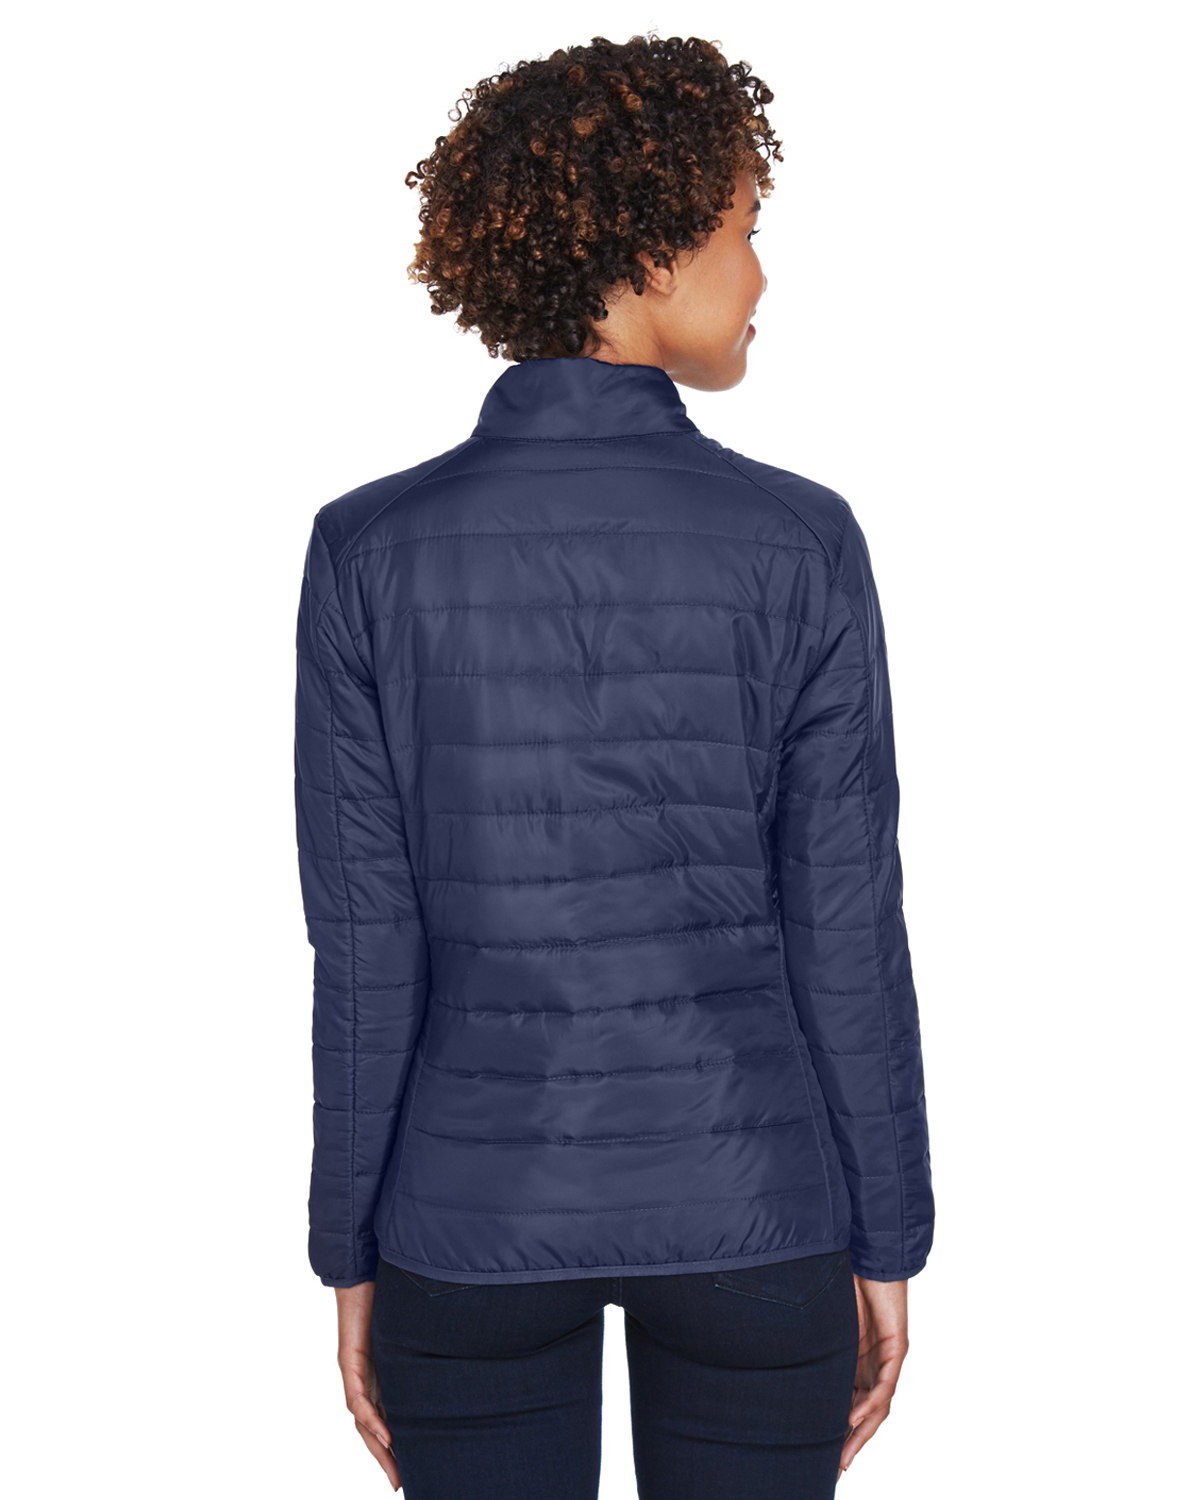 Ladies' Prevail Packable Puffer Jacket - CLASSIC NAVY - S - image 2 of 3